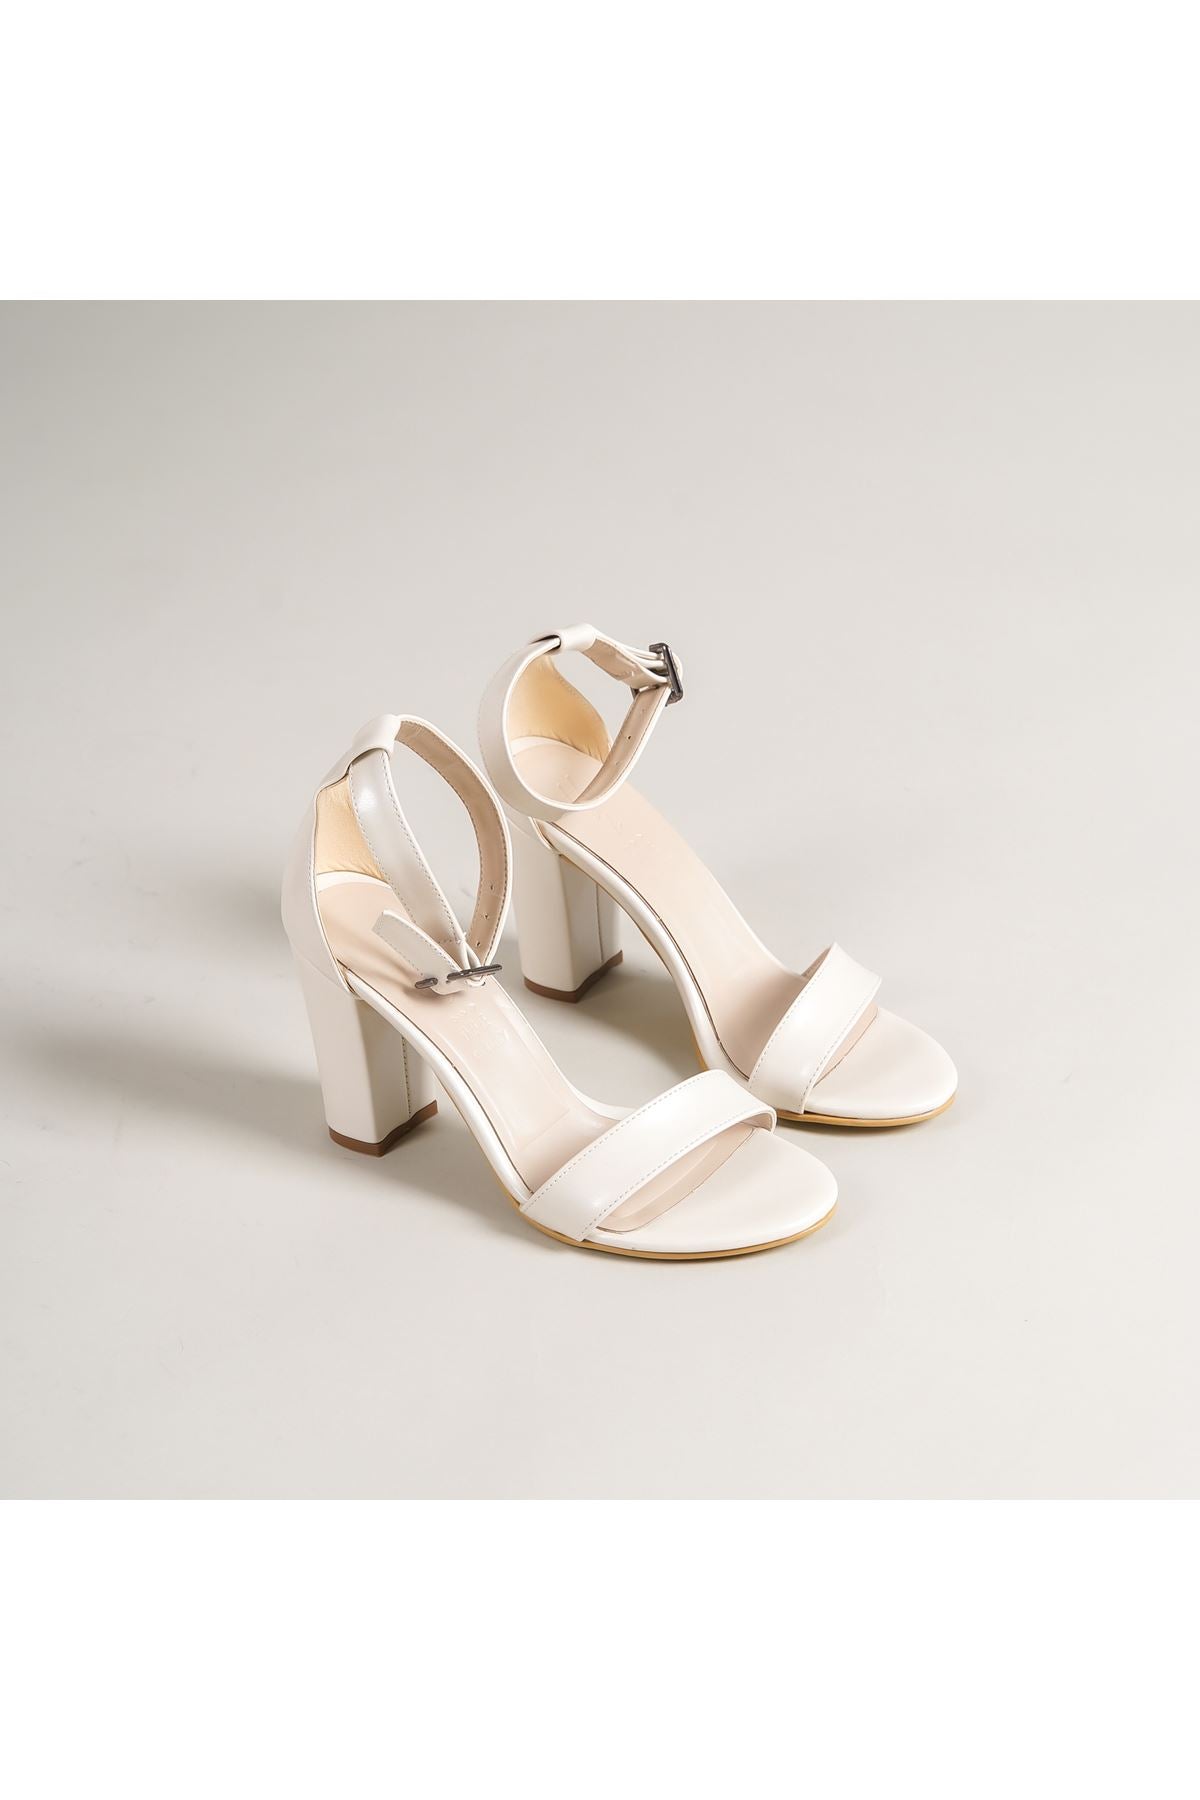 White Mother of Pearl Detailed Heeled Women's Shoes - STREETMODE™